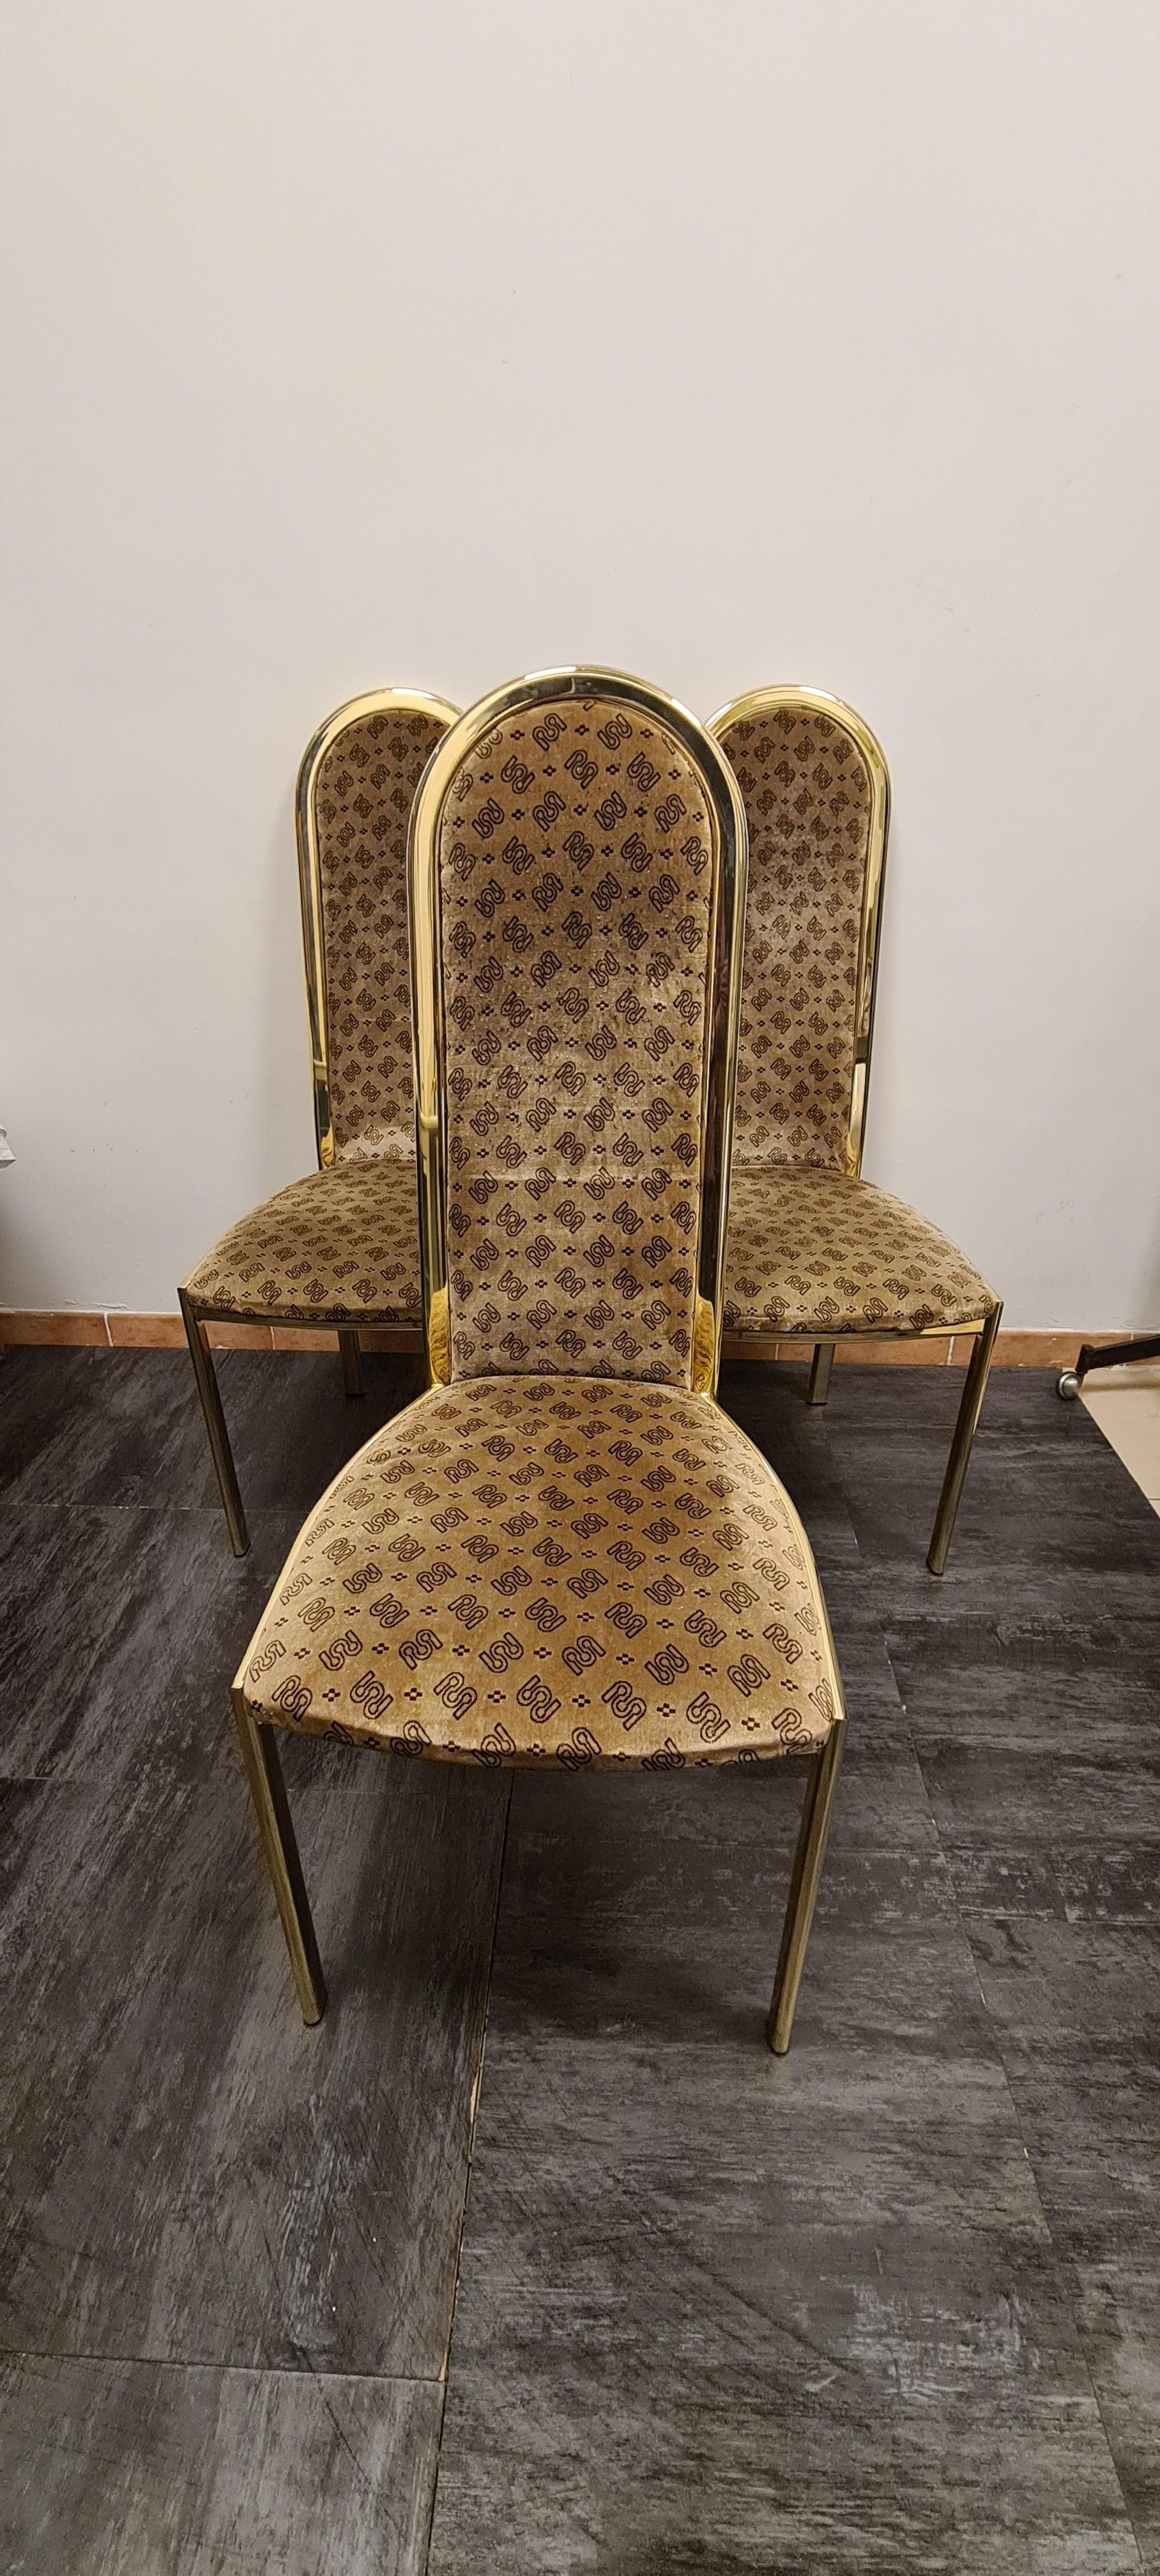 Three gilded chairs from the Morex company 1970s.

Elegant high-backed chairs made of galvanized metal and velvet.

Morex has been a leading manufacturer of galvanized metal furniture for many years.

Intact and without structural defects the 3